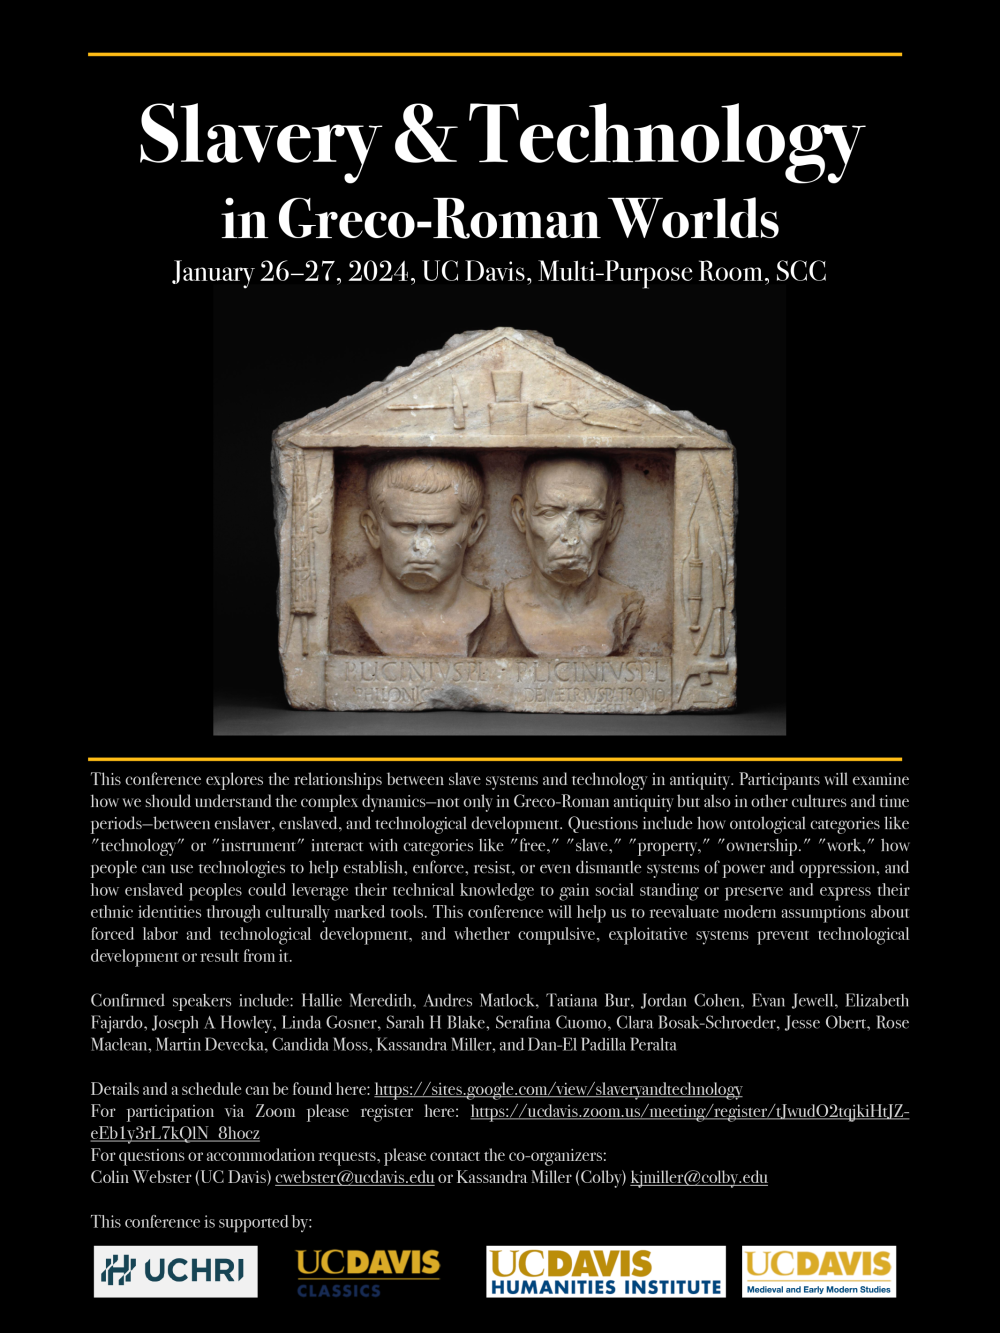 A flyer for the upcoming event, with an ancient statue. The text of the poster is written out above.